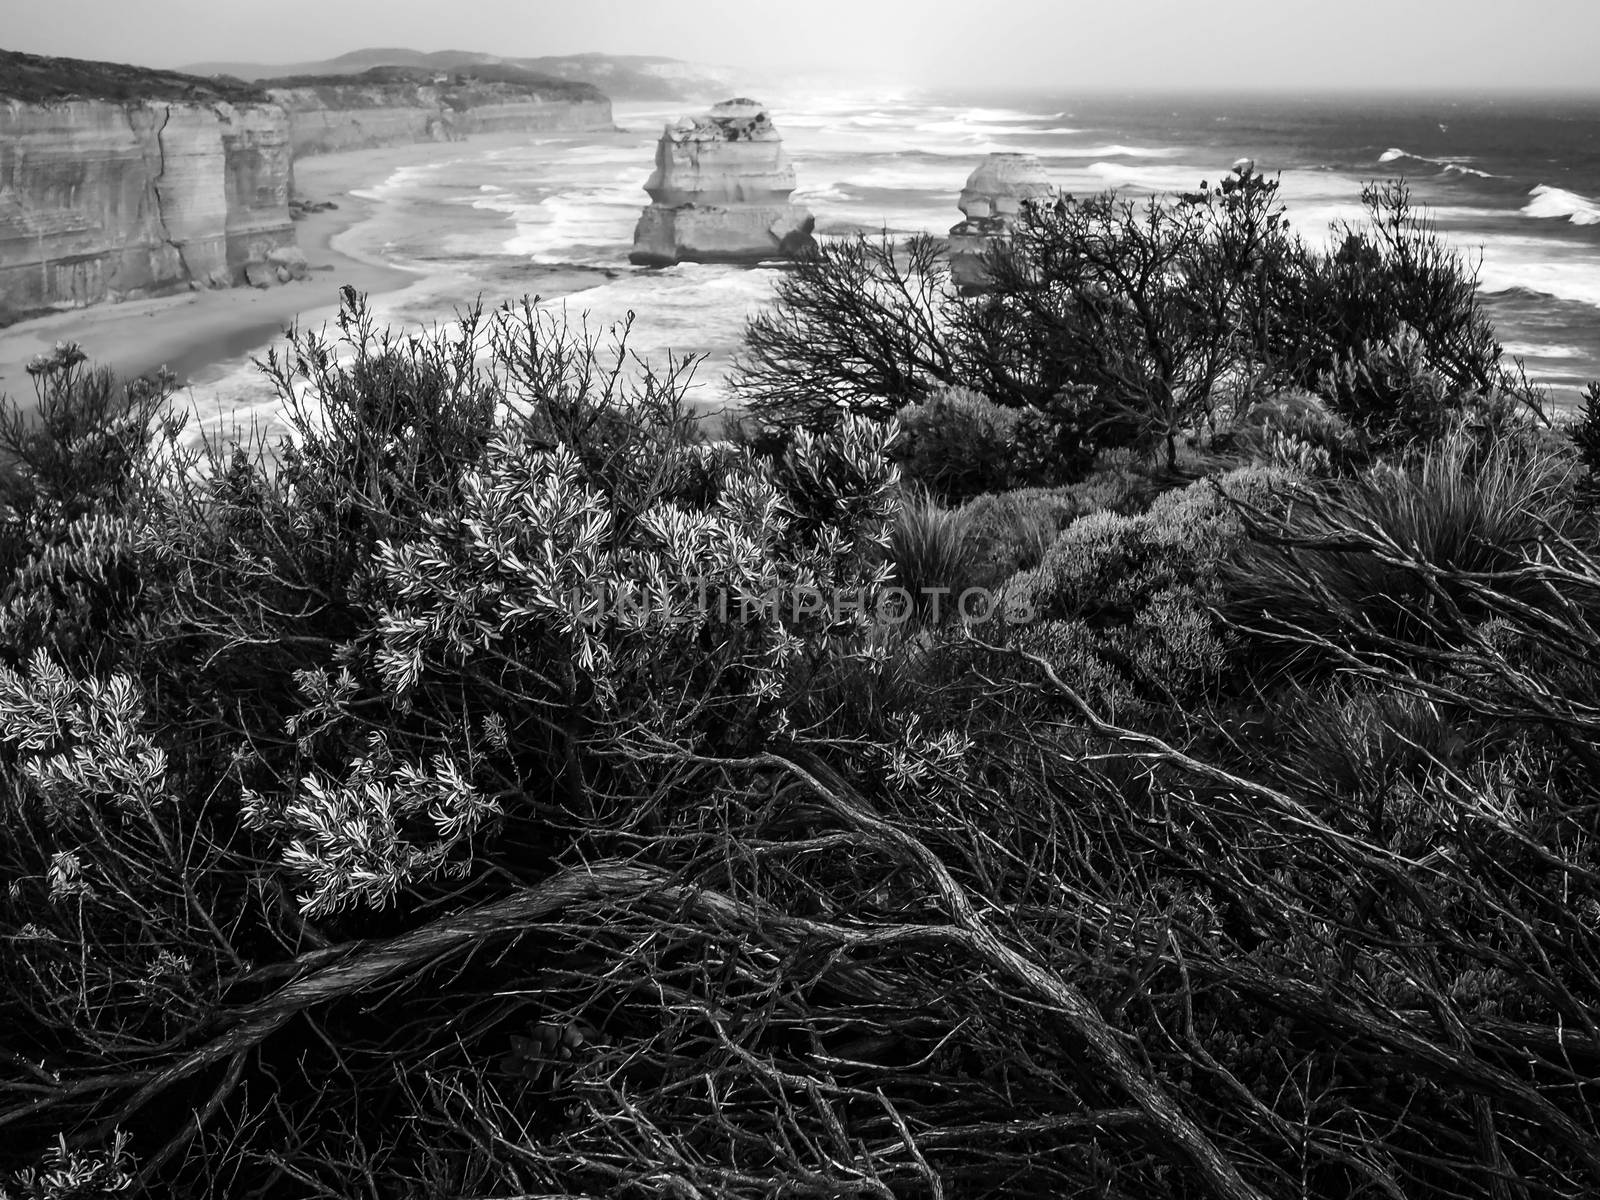 Black and white image of Rock islands along Australian coastline. Tourist attraction and travel destination along Australian coastline, Victoria, Australia